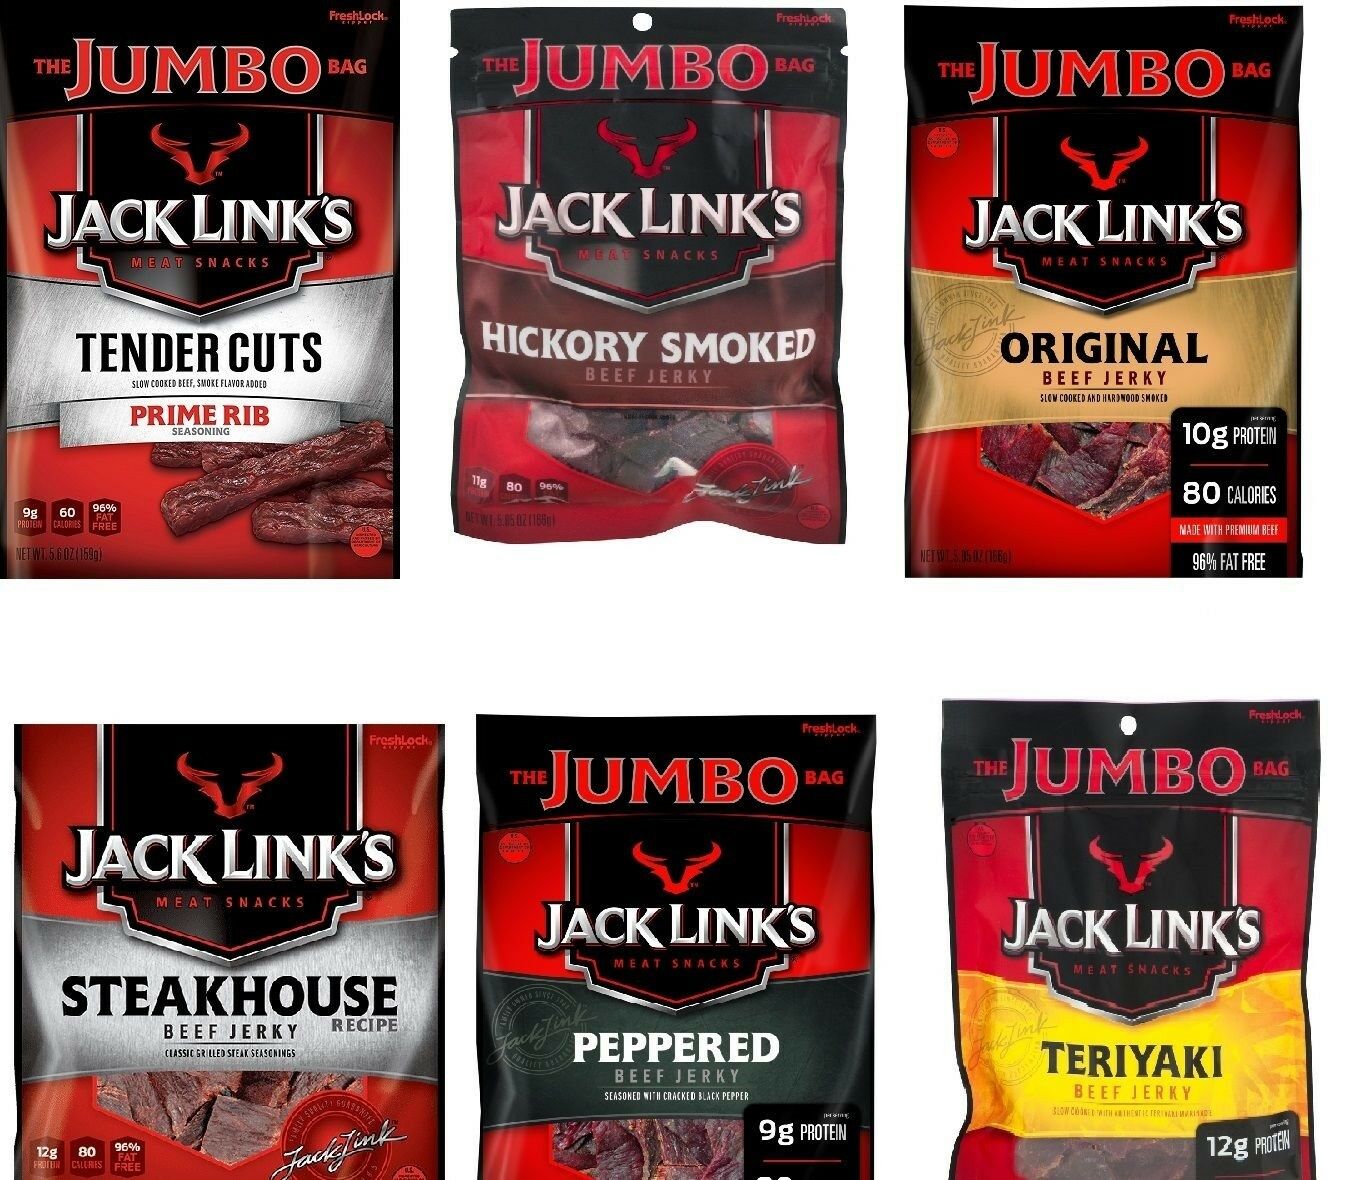 Jack Links Beef Jerky Many Flavors And Sizes Pick One Bag Easy Shipping + Save